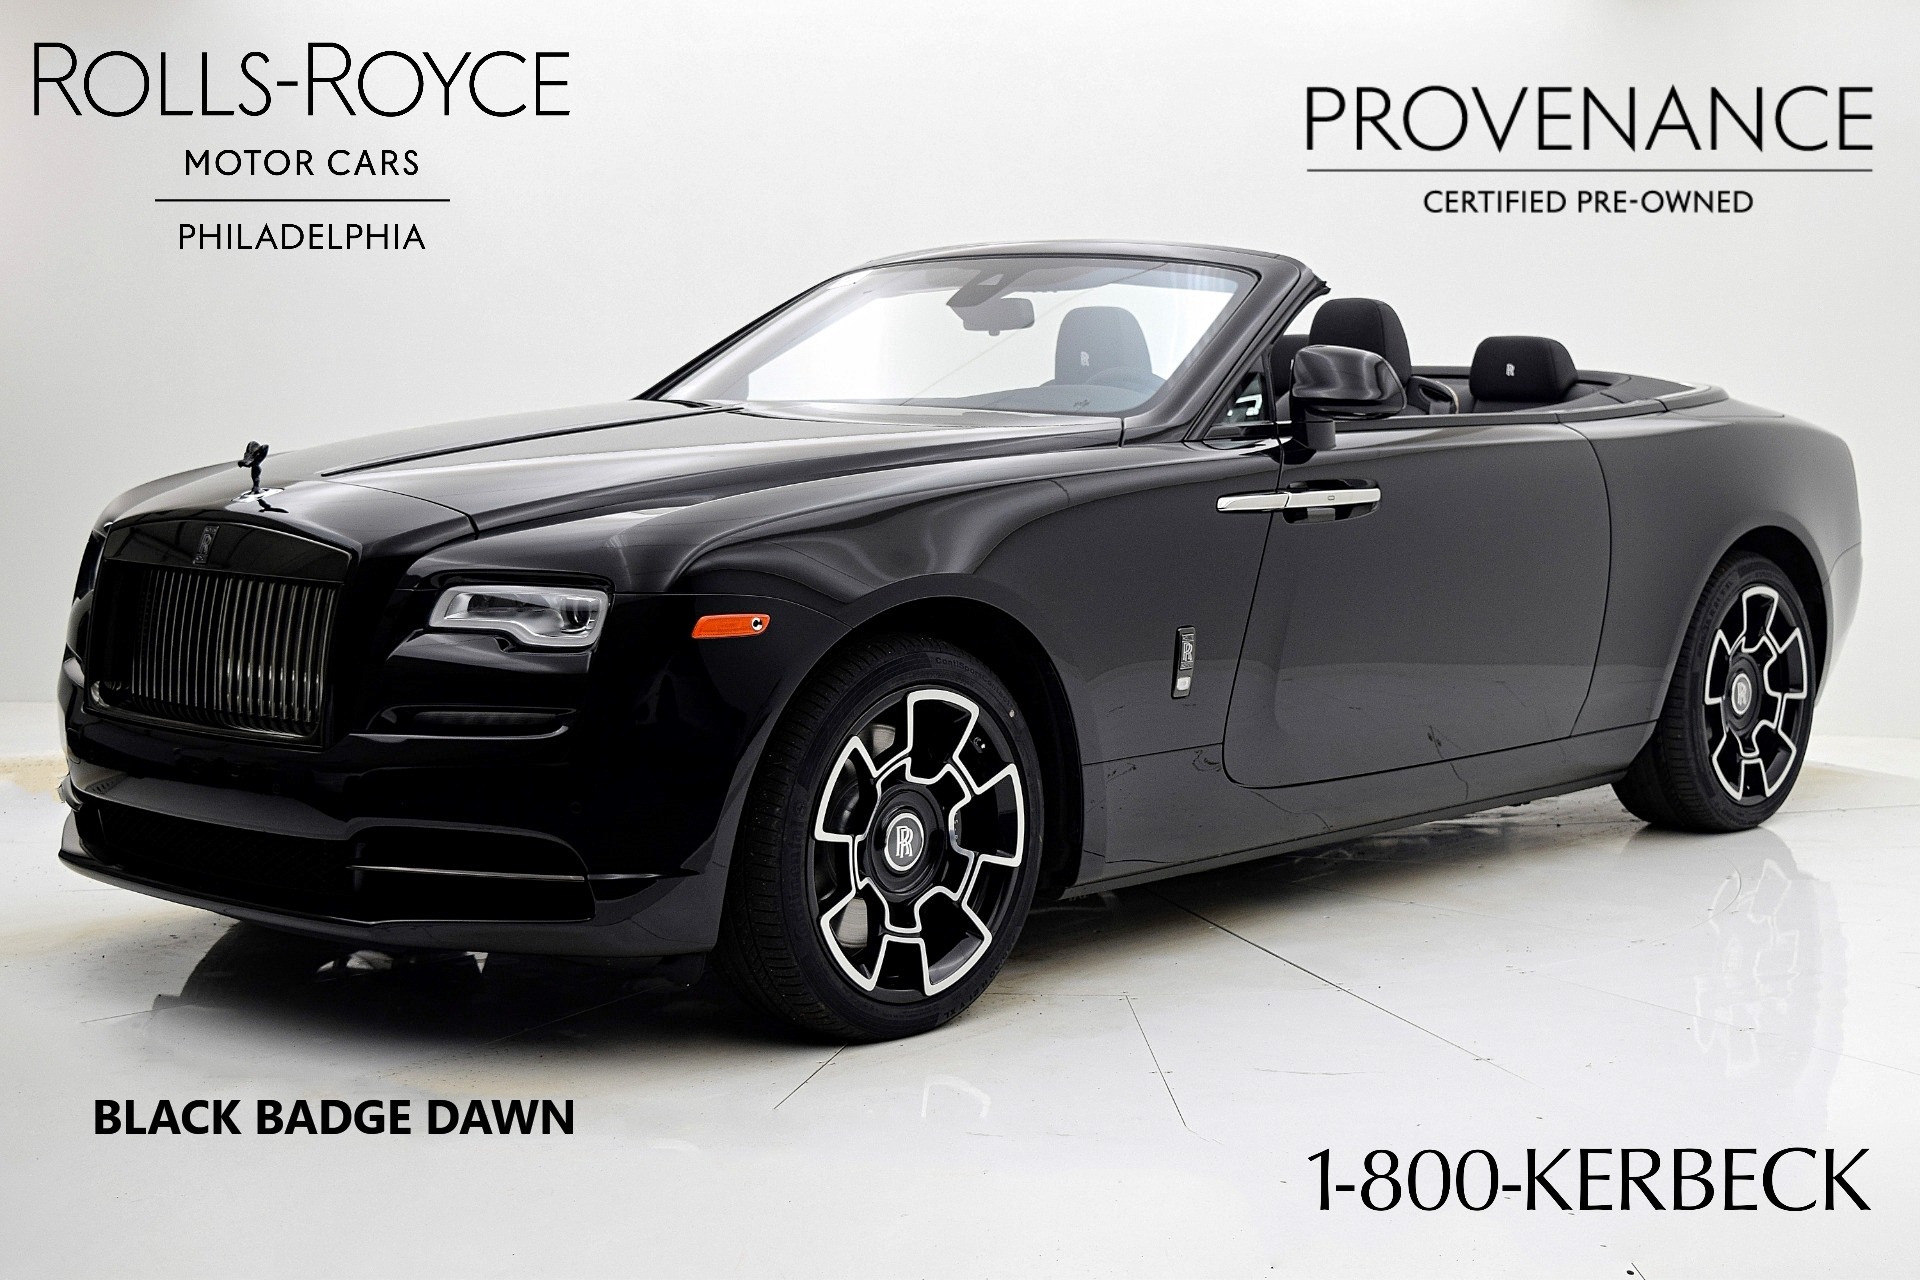 Used 2019 Rolls-Royce Black Badge Dawn / LEASE OPTIONS AVAILABLE for sale $339,000 at Rolls-Royce Motor Cars Philadelphia in Palmyra NJ 08065 2